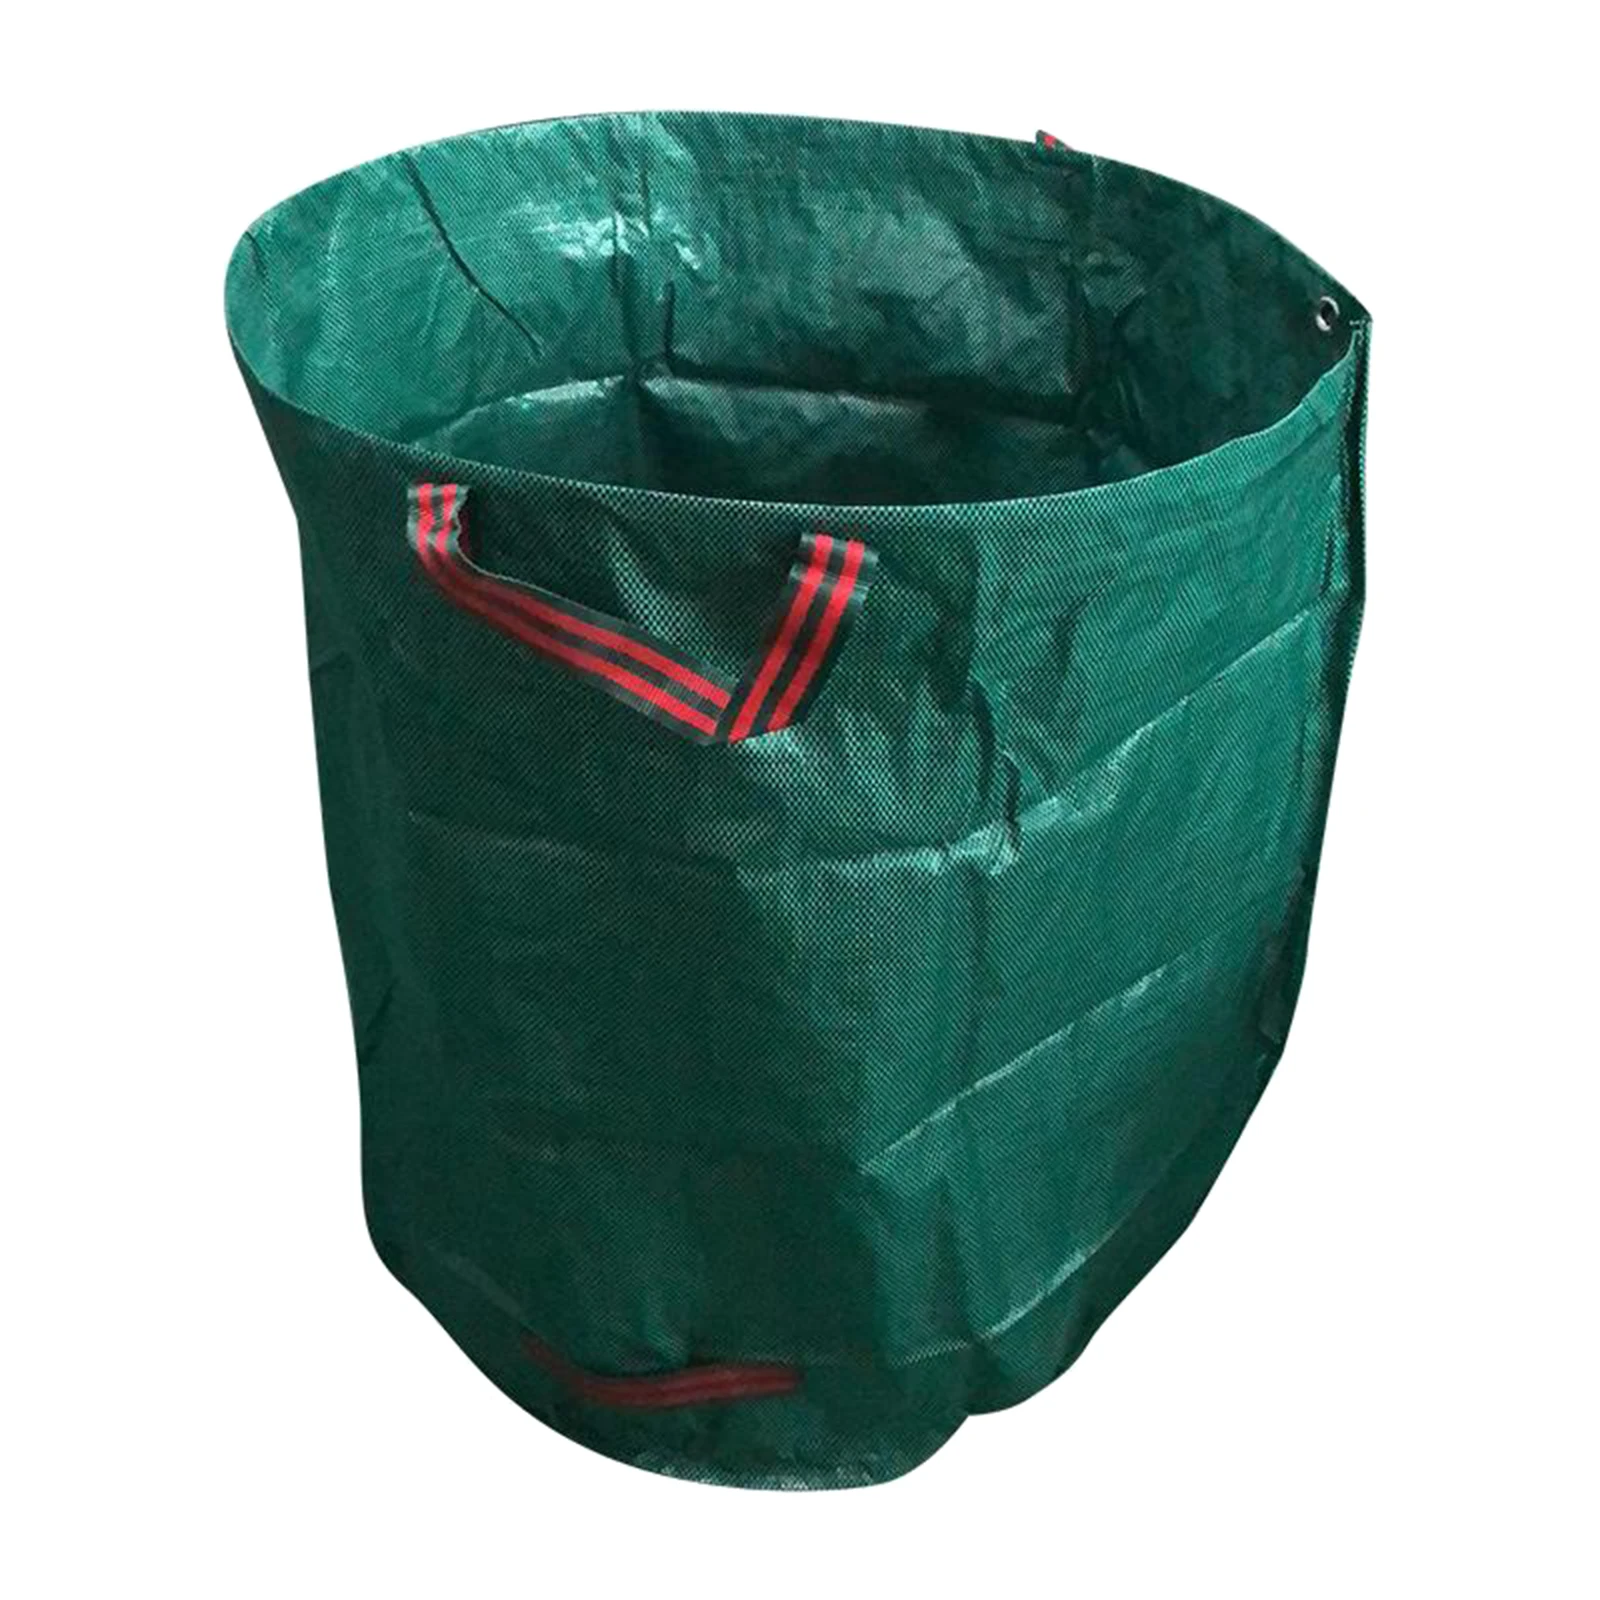 16-80 gallon Large Capacity Garden Waste Bag Yard Fallen Leaves Collection Storage Bags Plant Clippings Bag